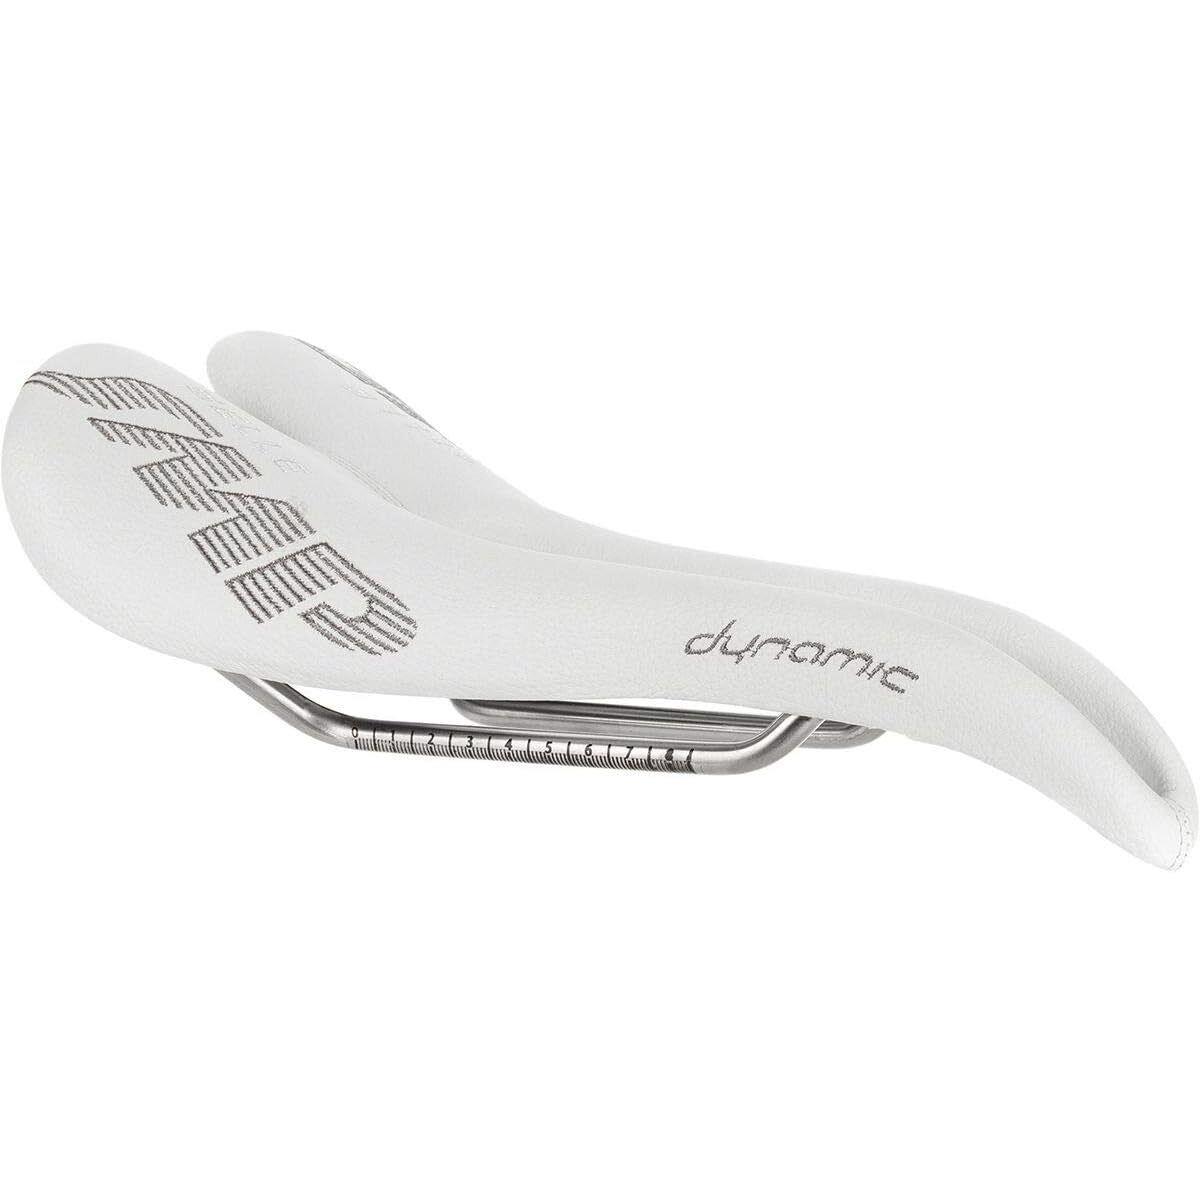 Selle Smp Dynamic Saddle White Stainless Steel Rails Leather Covering Gel Pad